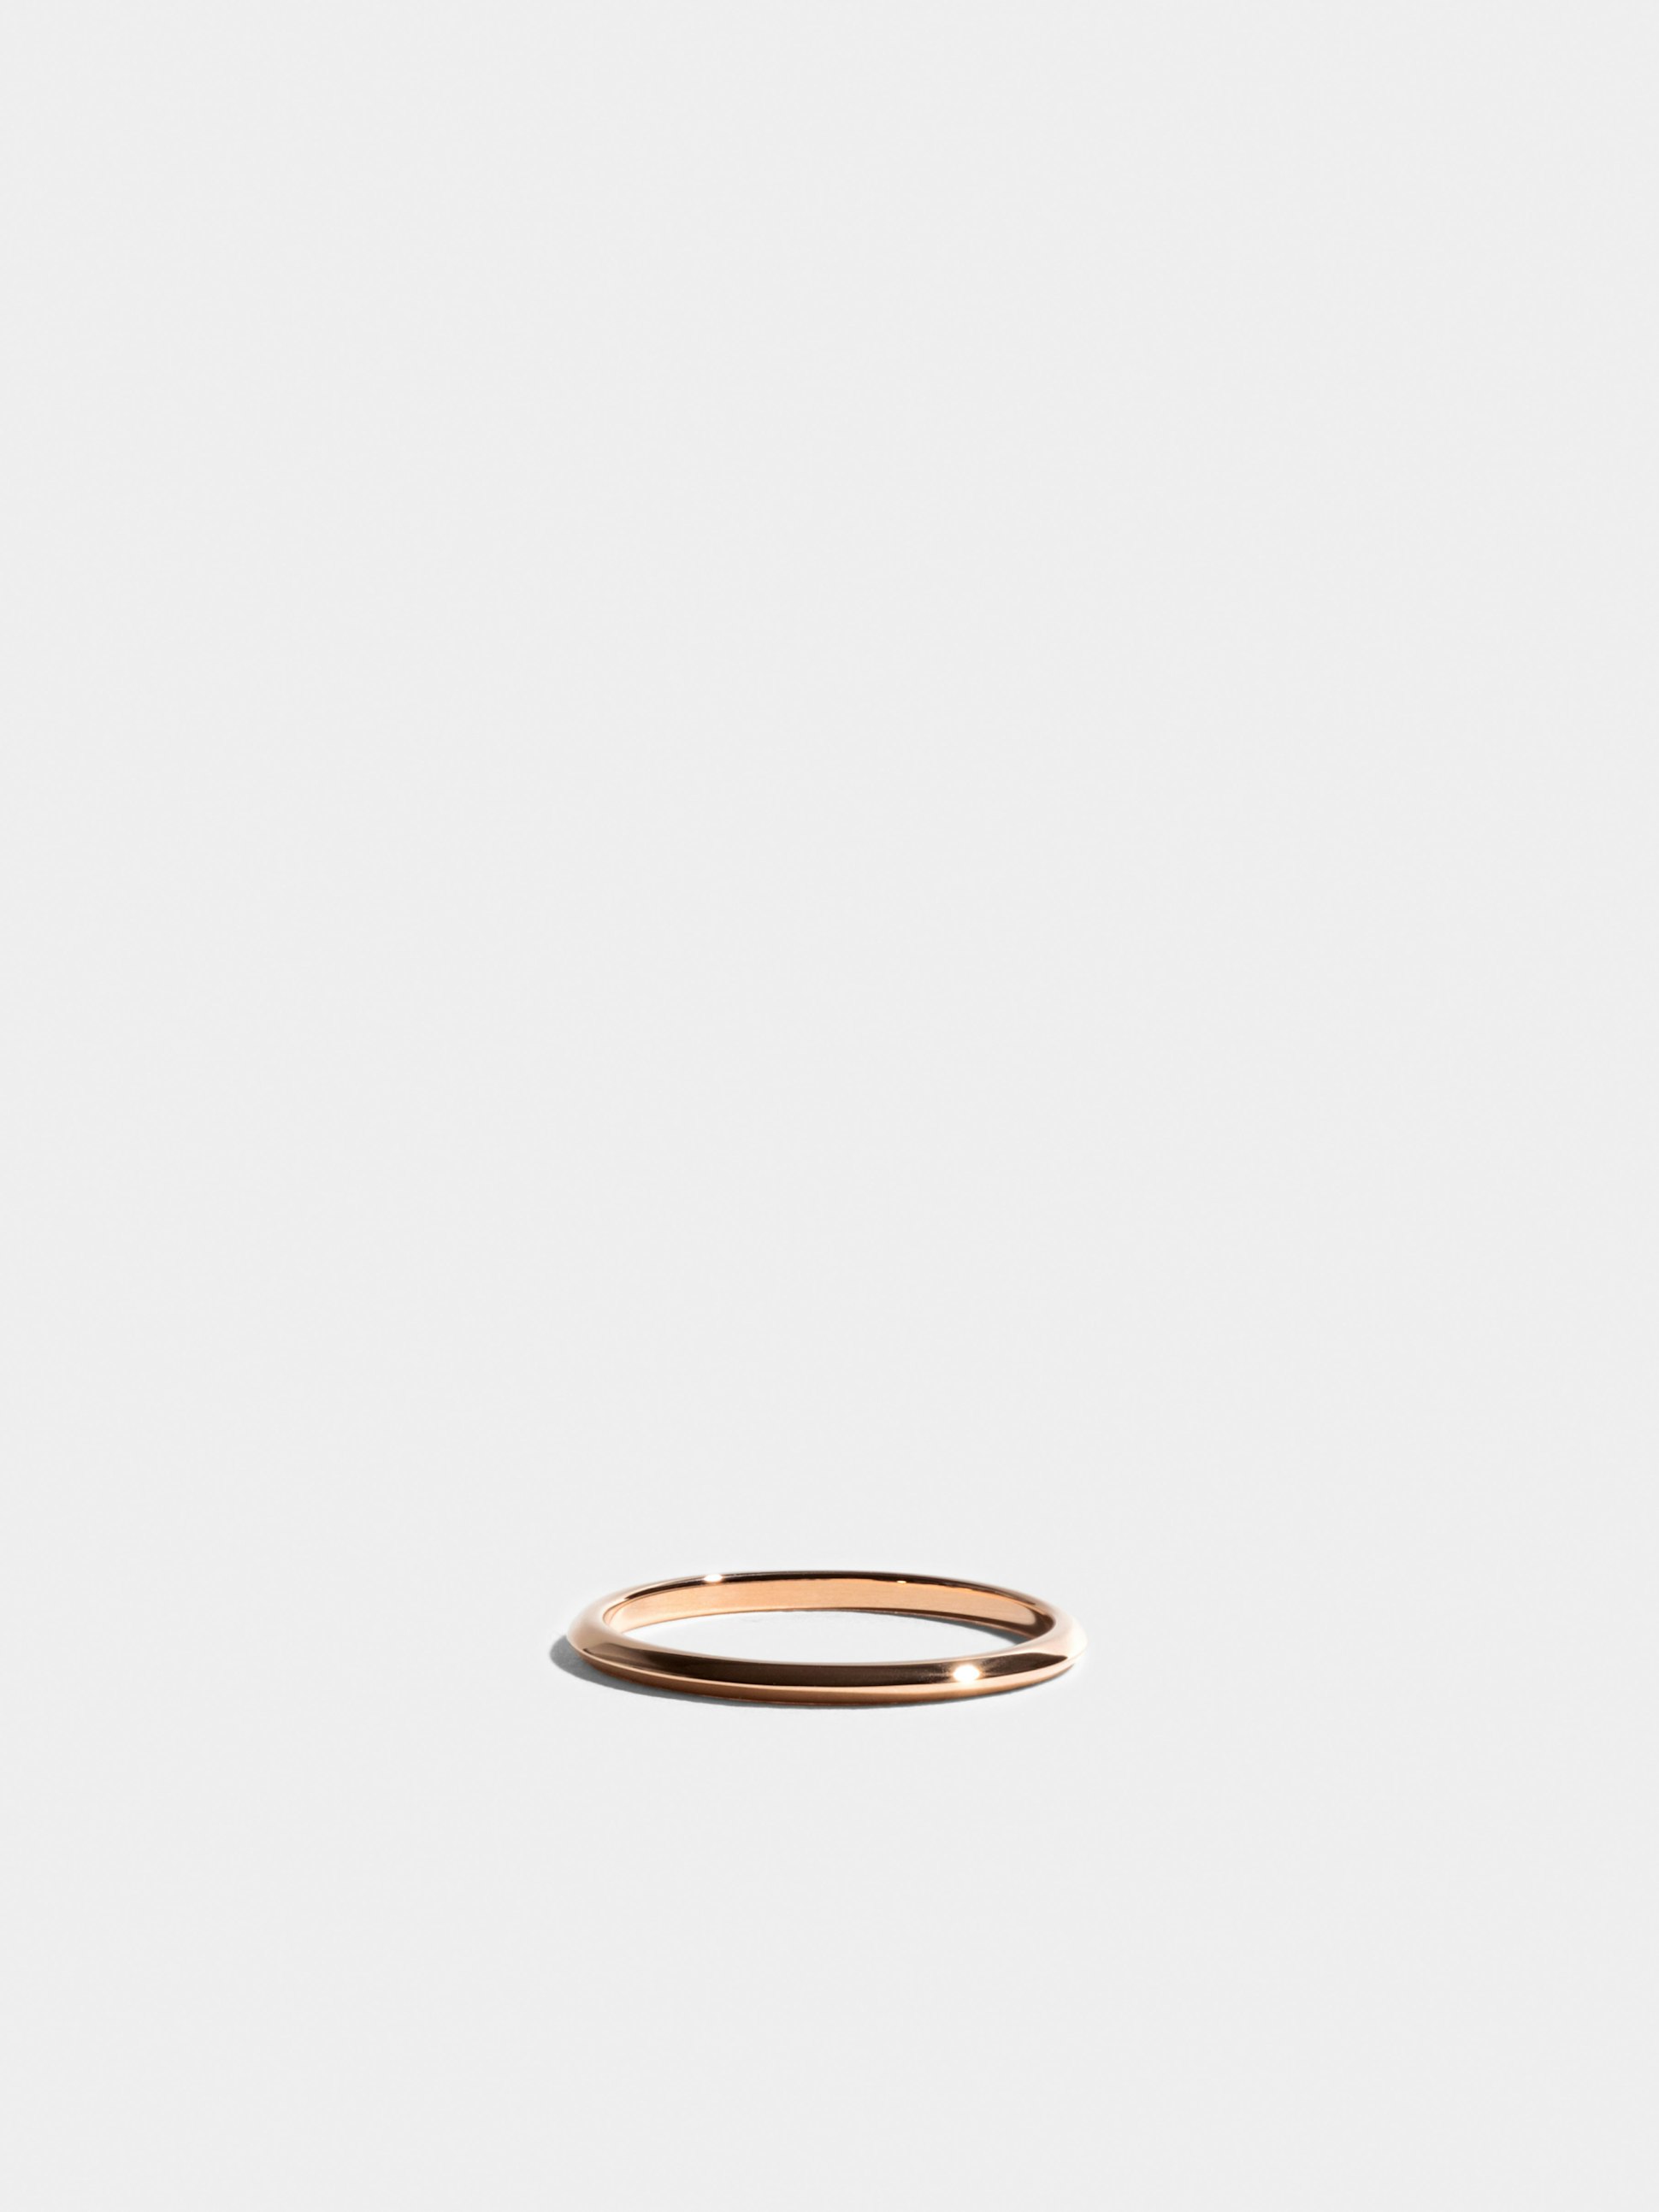 Anagramme "biseau" ring in 18k Fairmined ethical rose gold